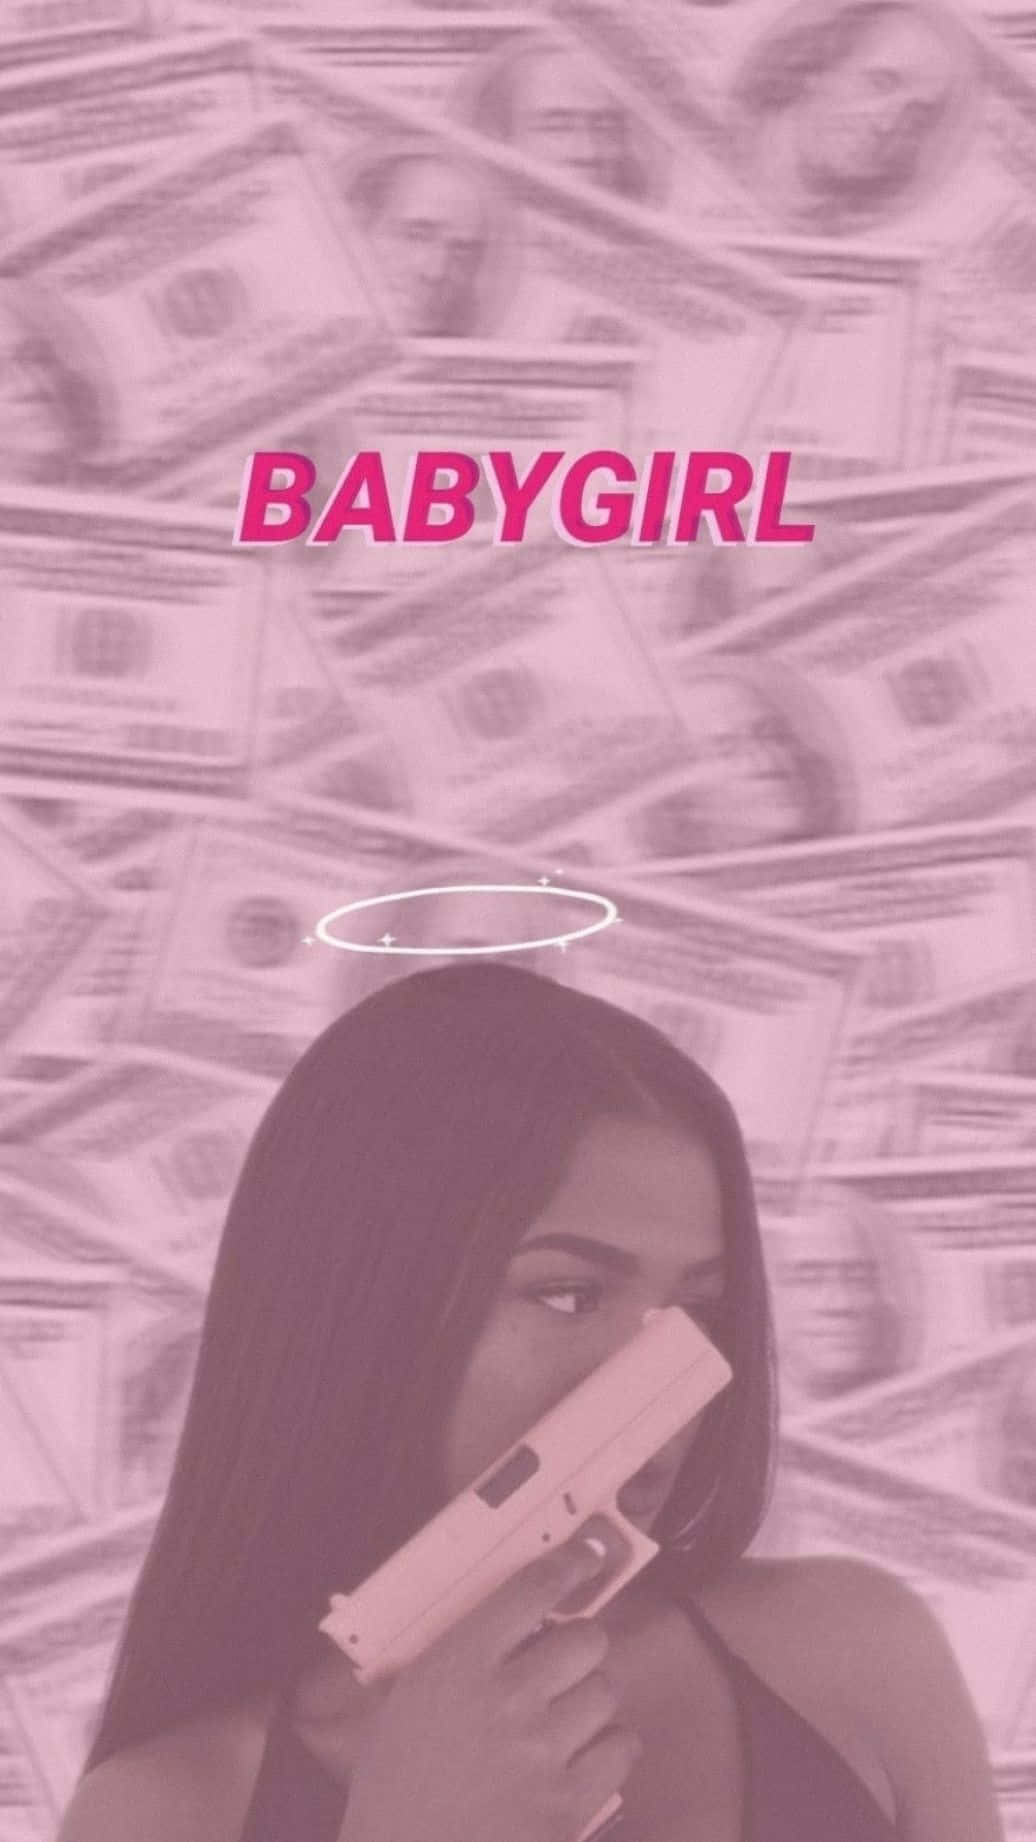 Babygirl wallpaper for phone with a girl holding a gun - Money